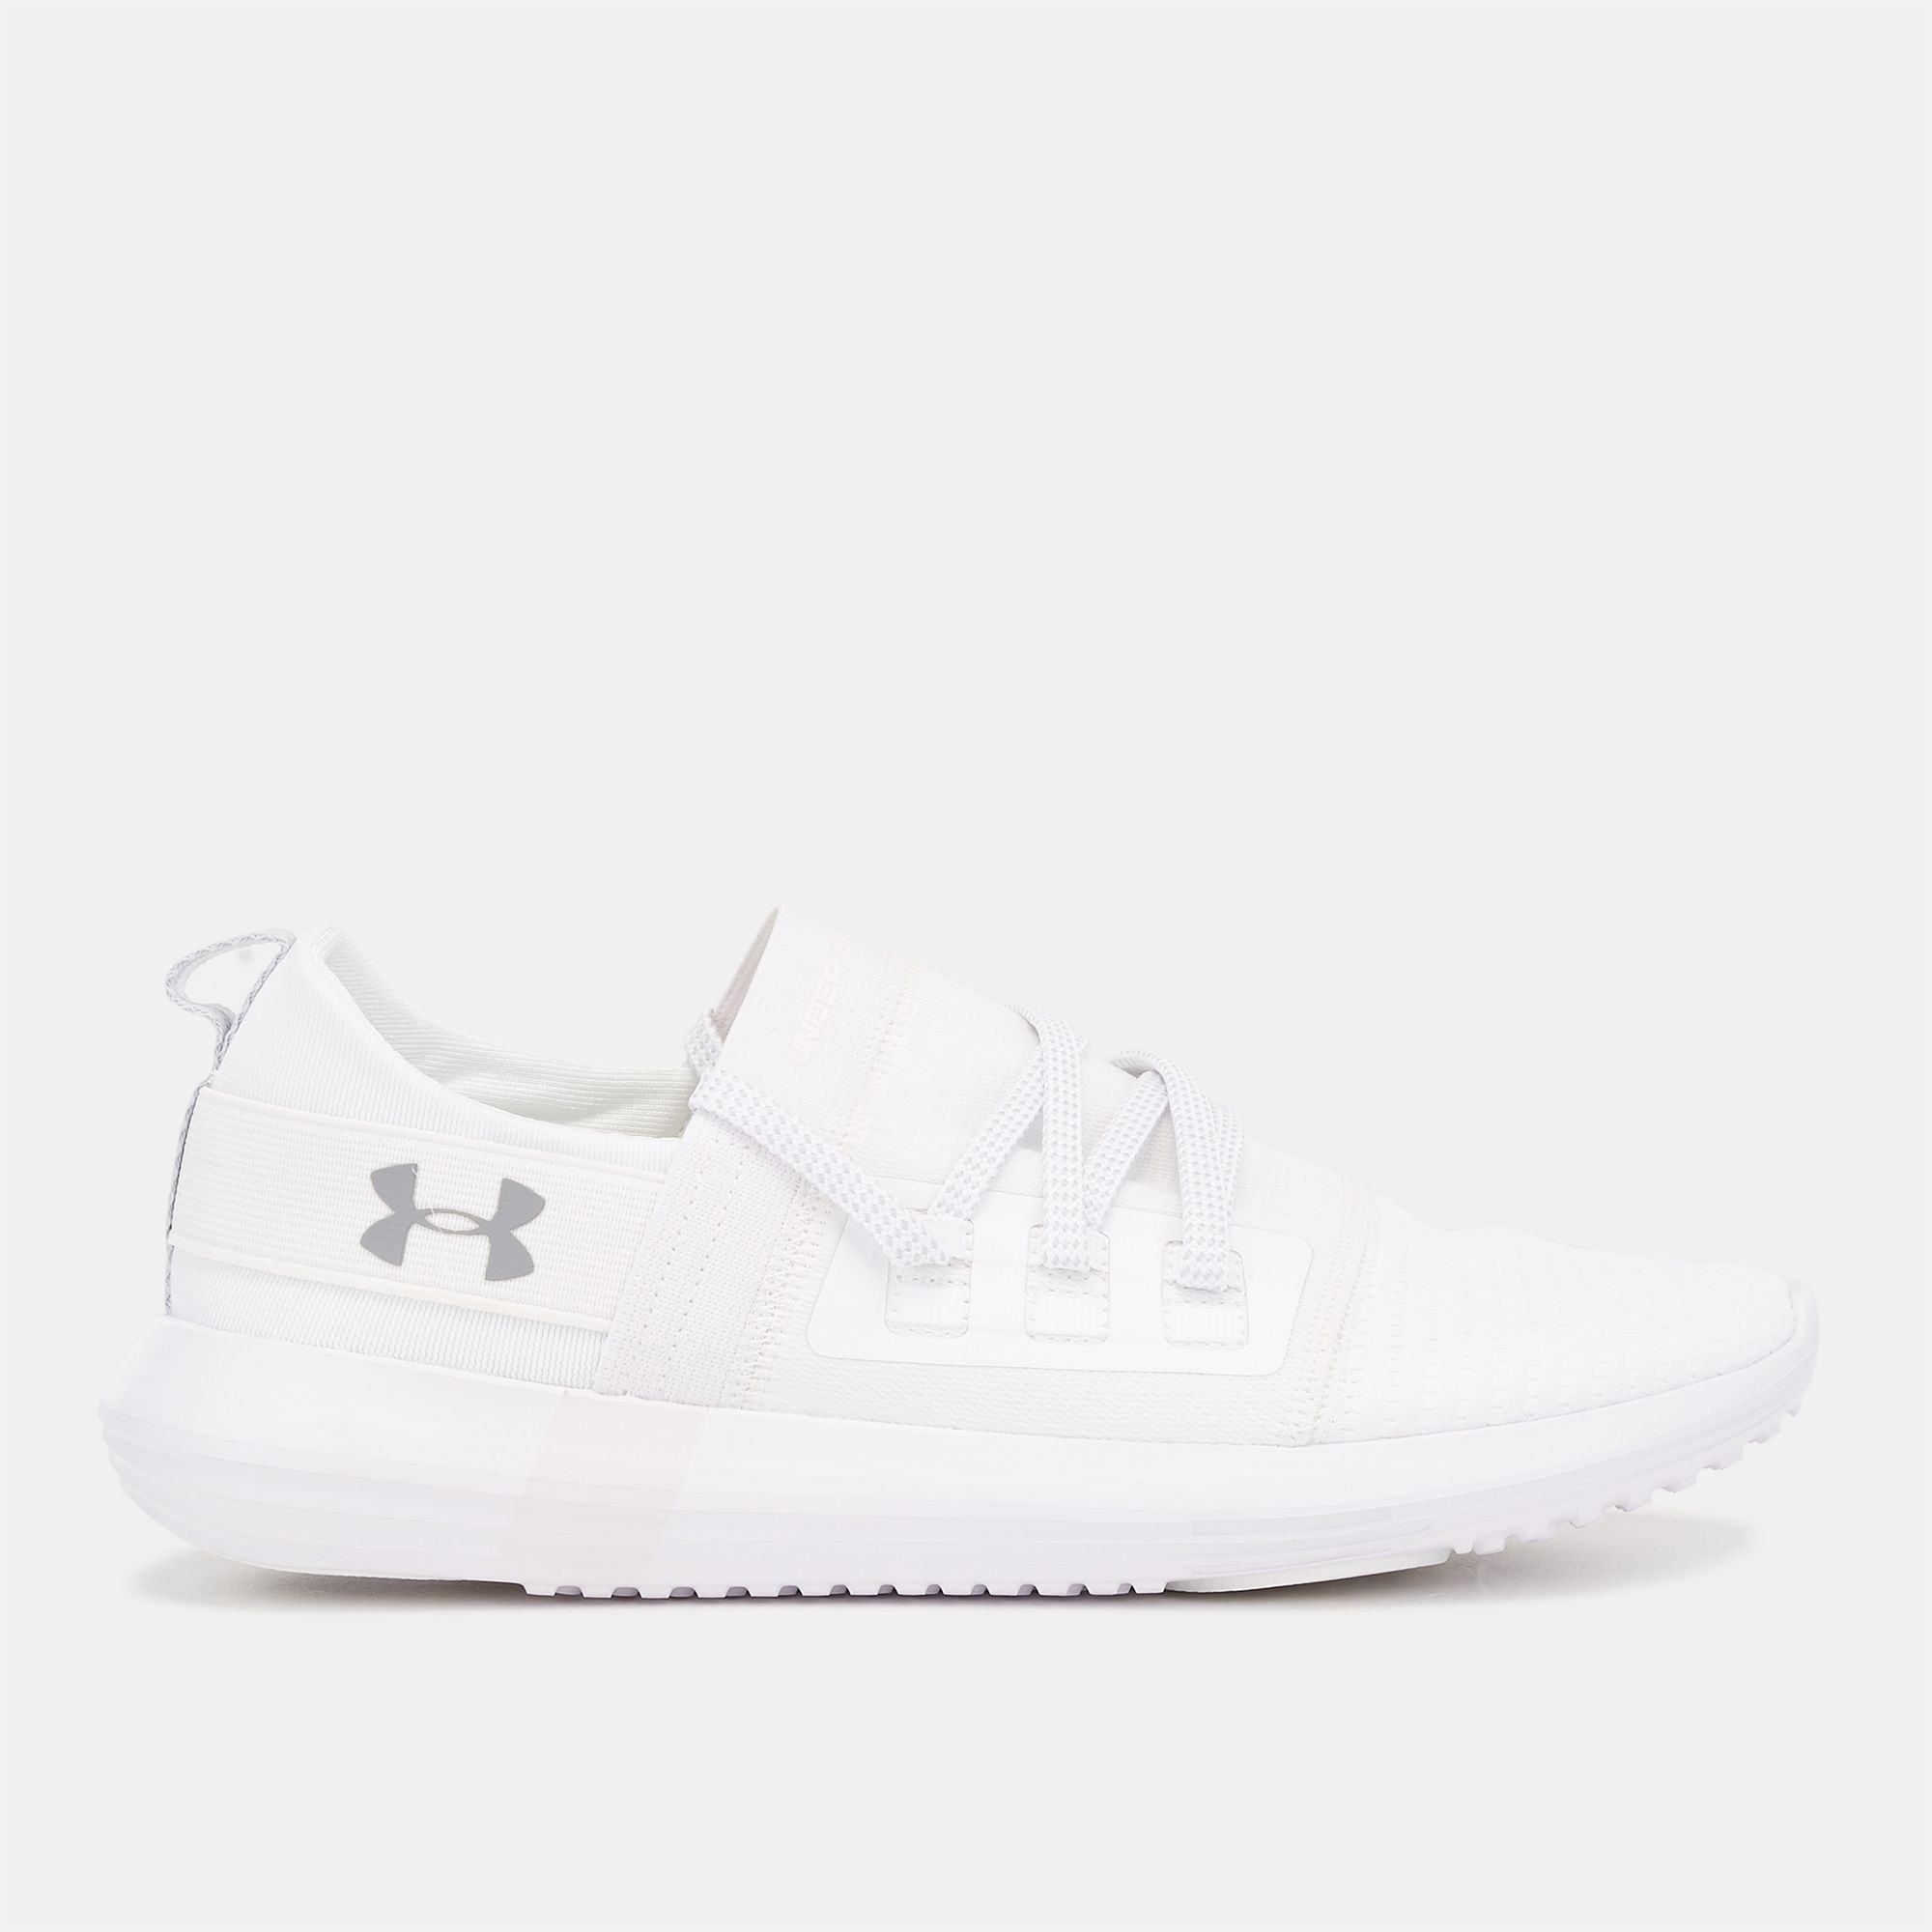 under armour lifestyle shoes